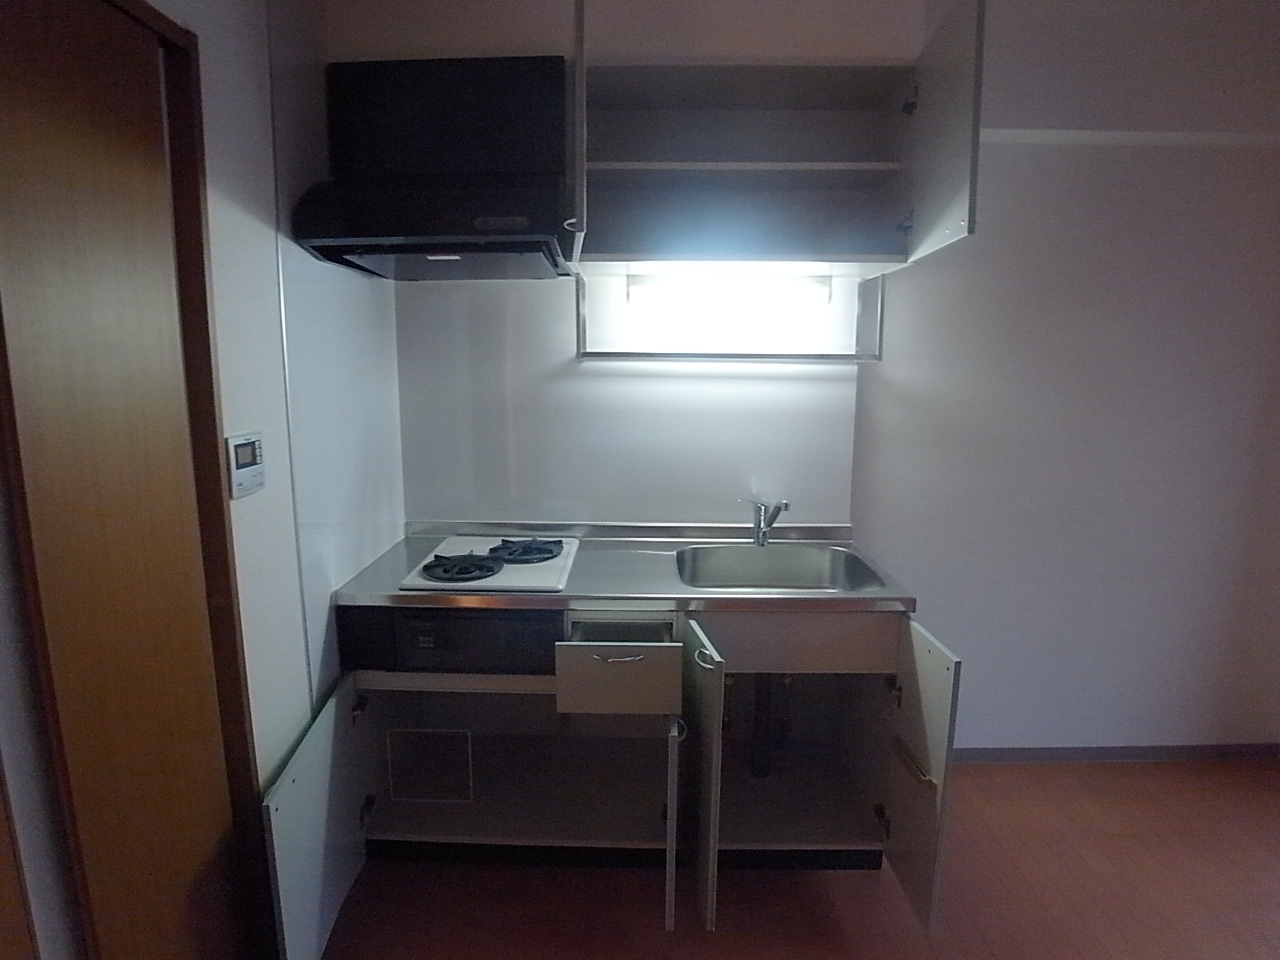 Kitchen. System kitchen (gas 2 burners) ・ With grill